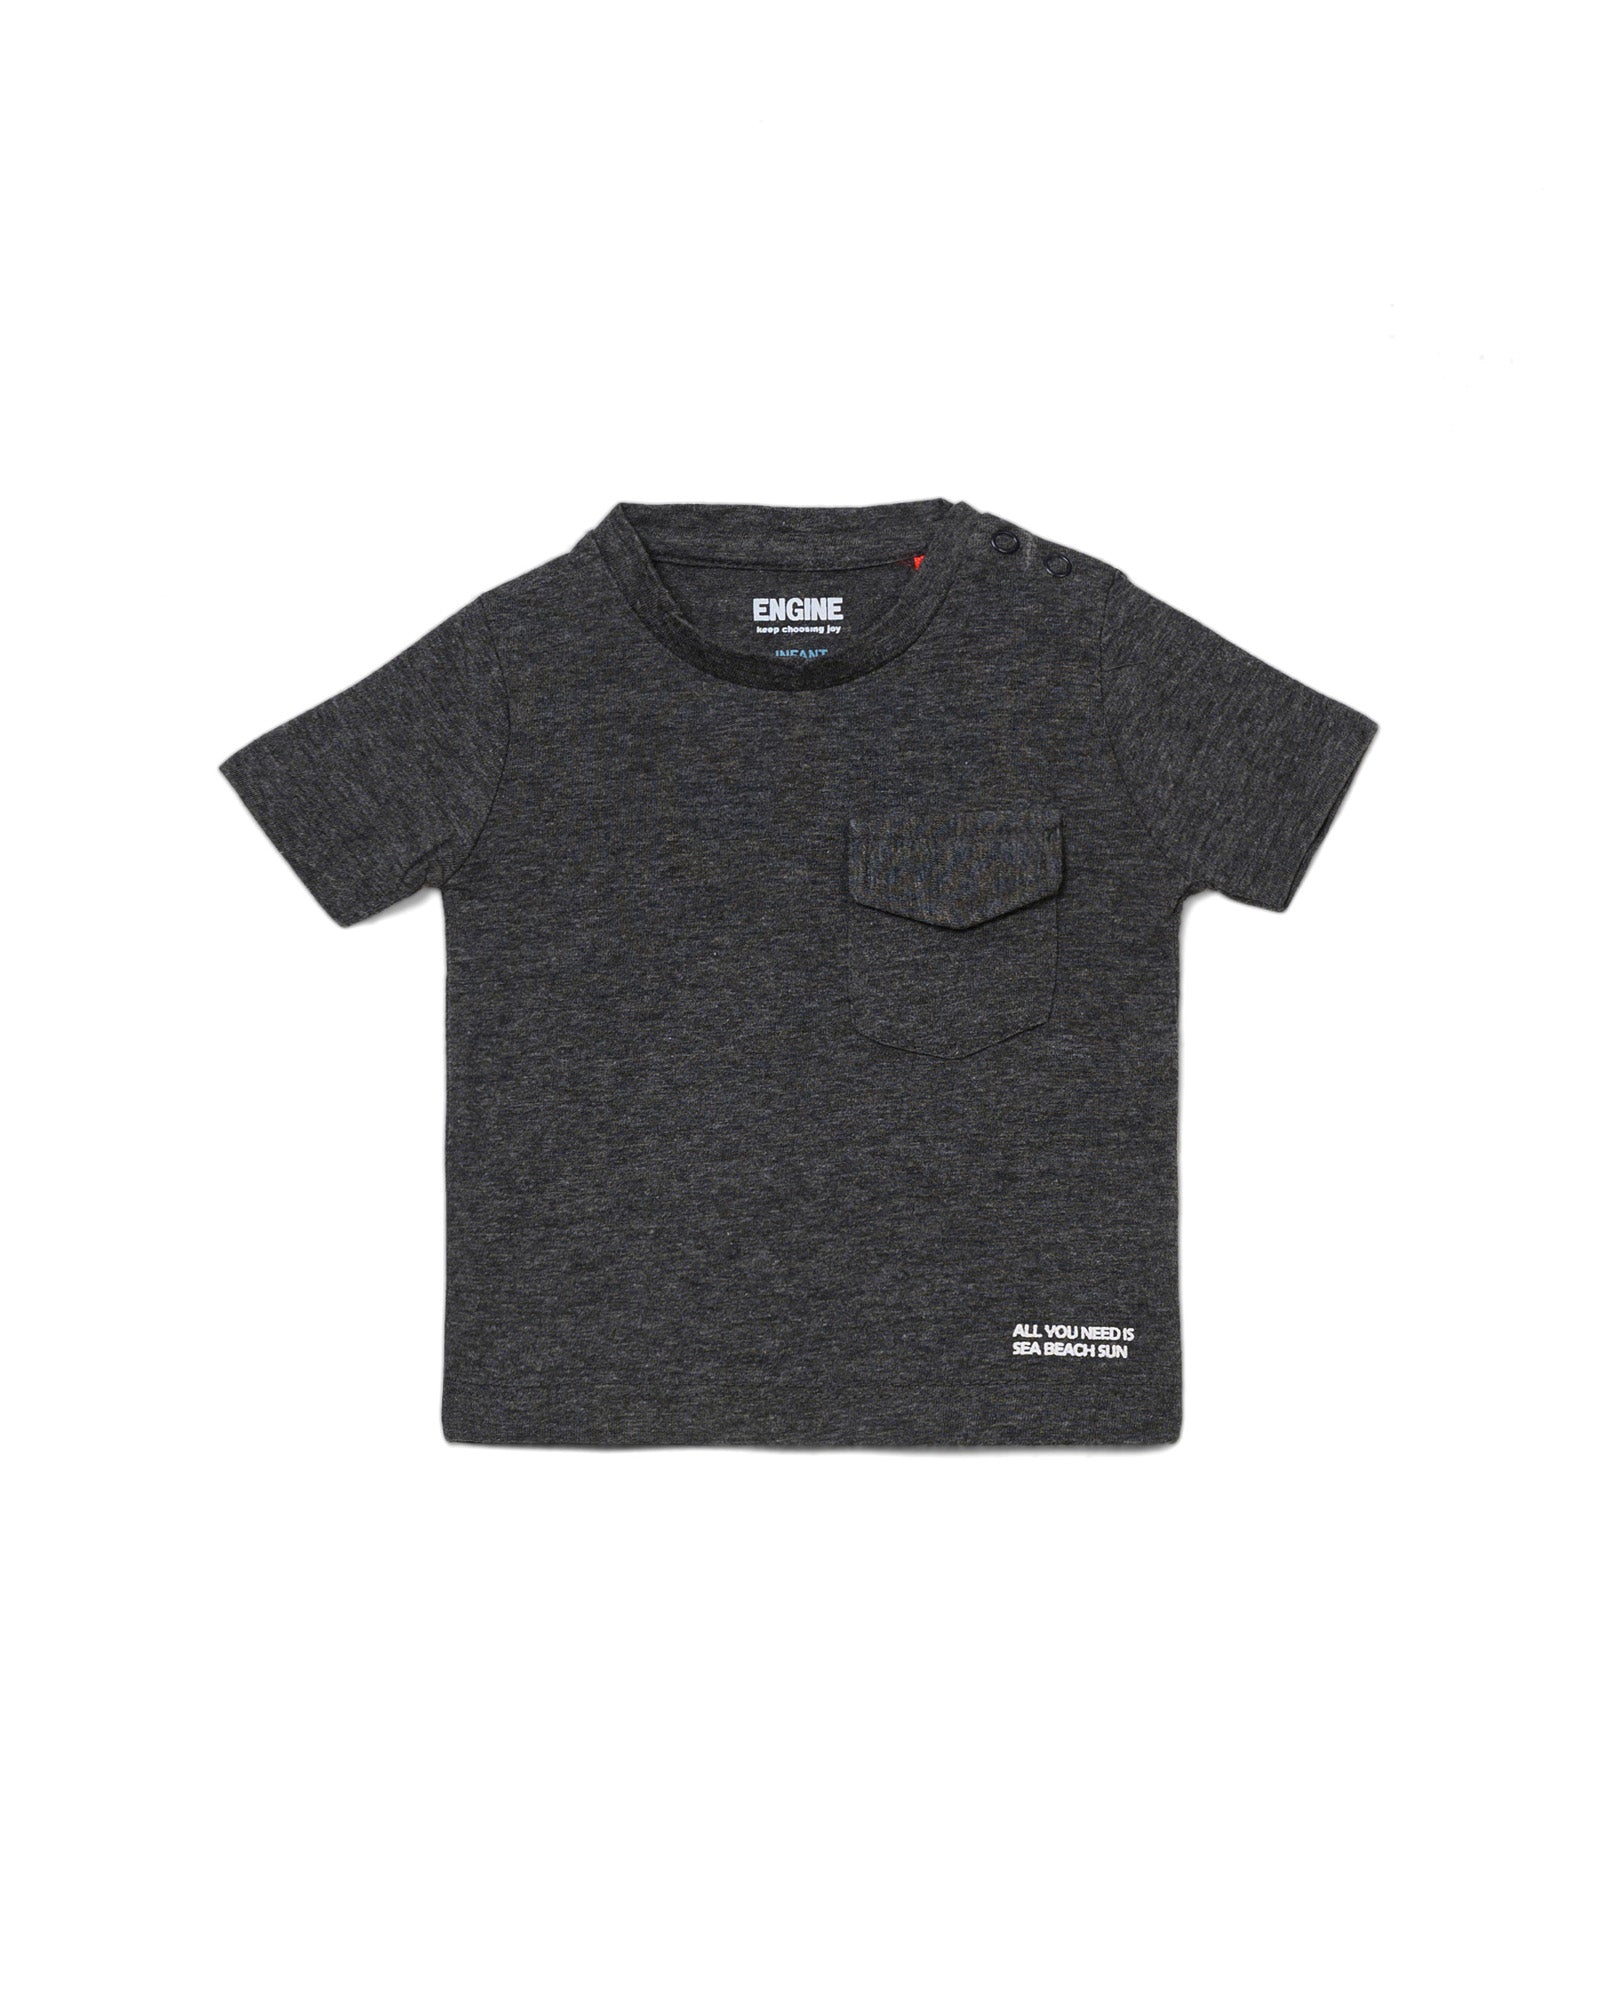 Crew Neck With Pocket For BOYS - ENGINE